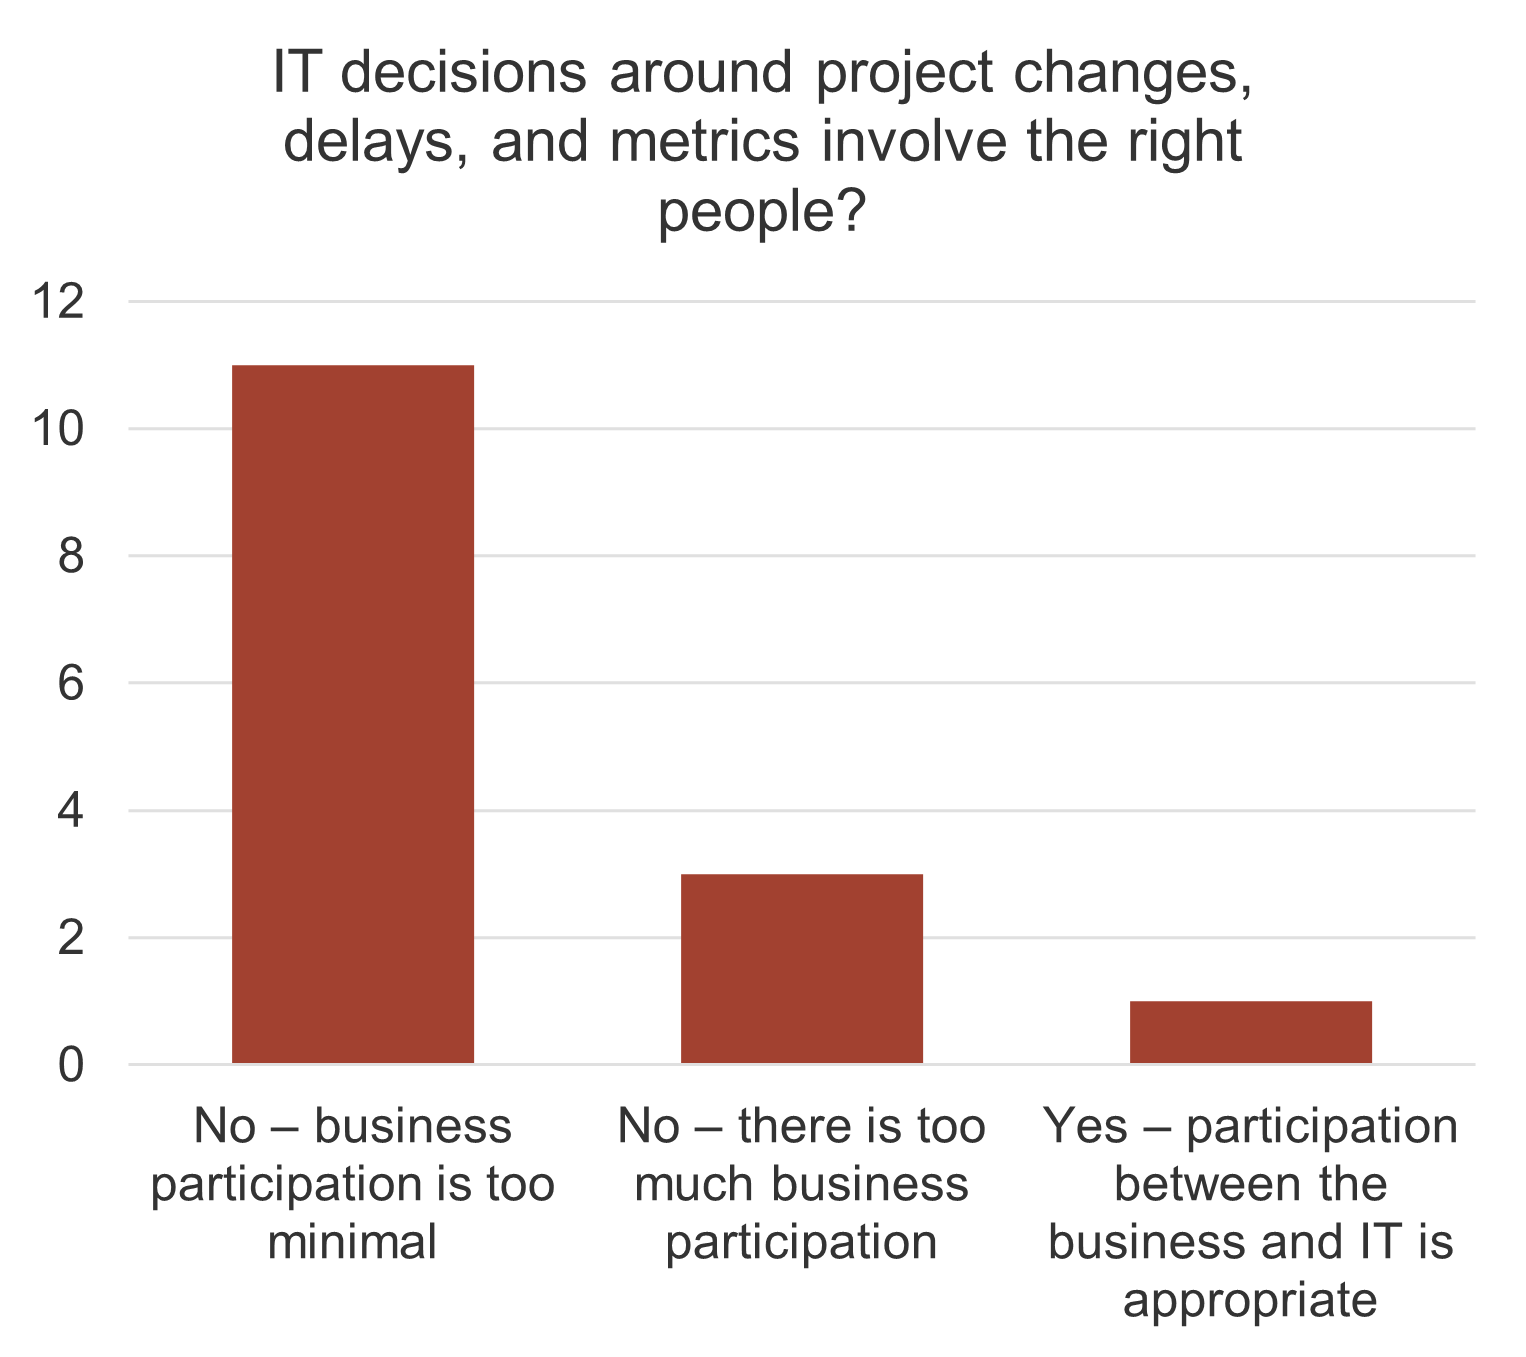 A bar graph is depicted. The title is: IT decisions around project changes, delays, and metrics involve the right people?